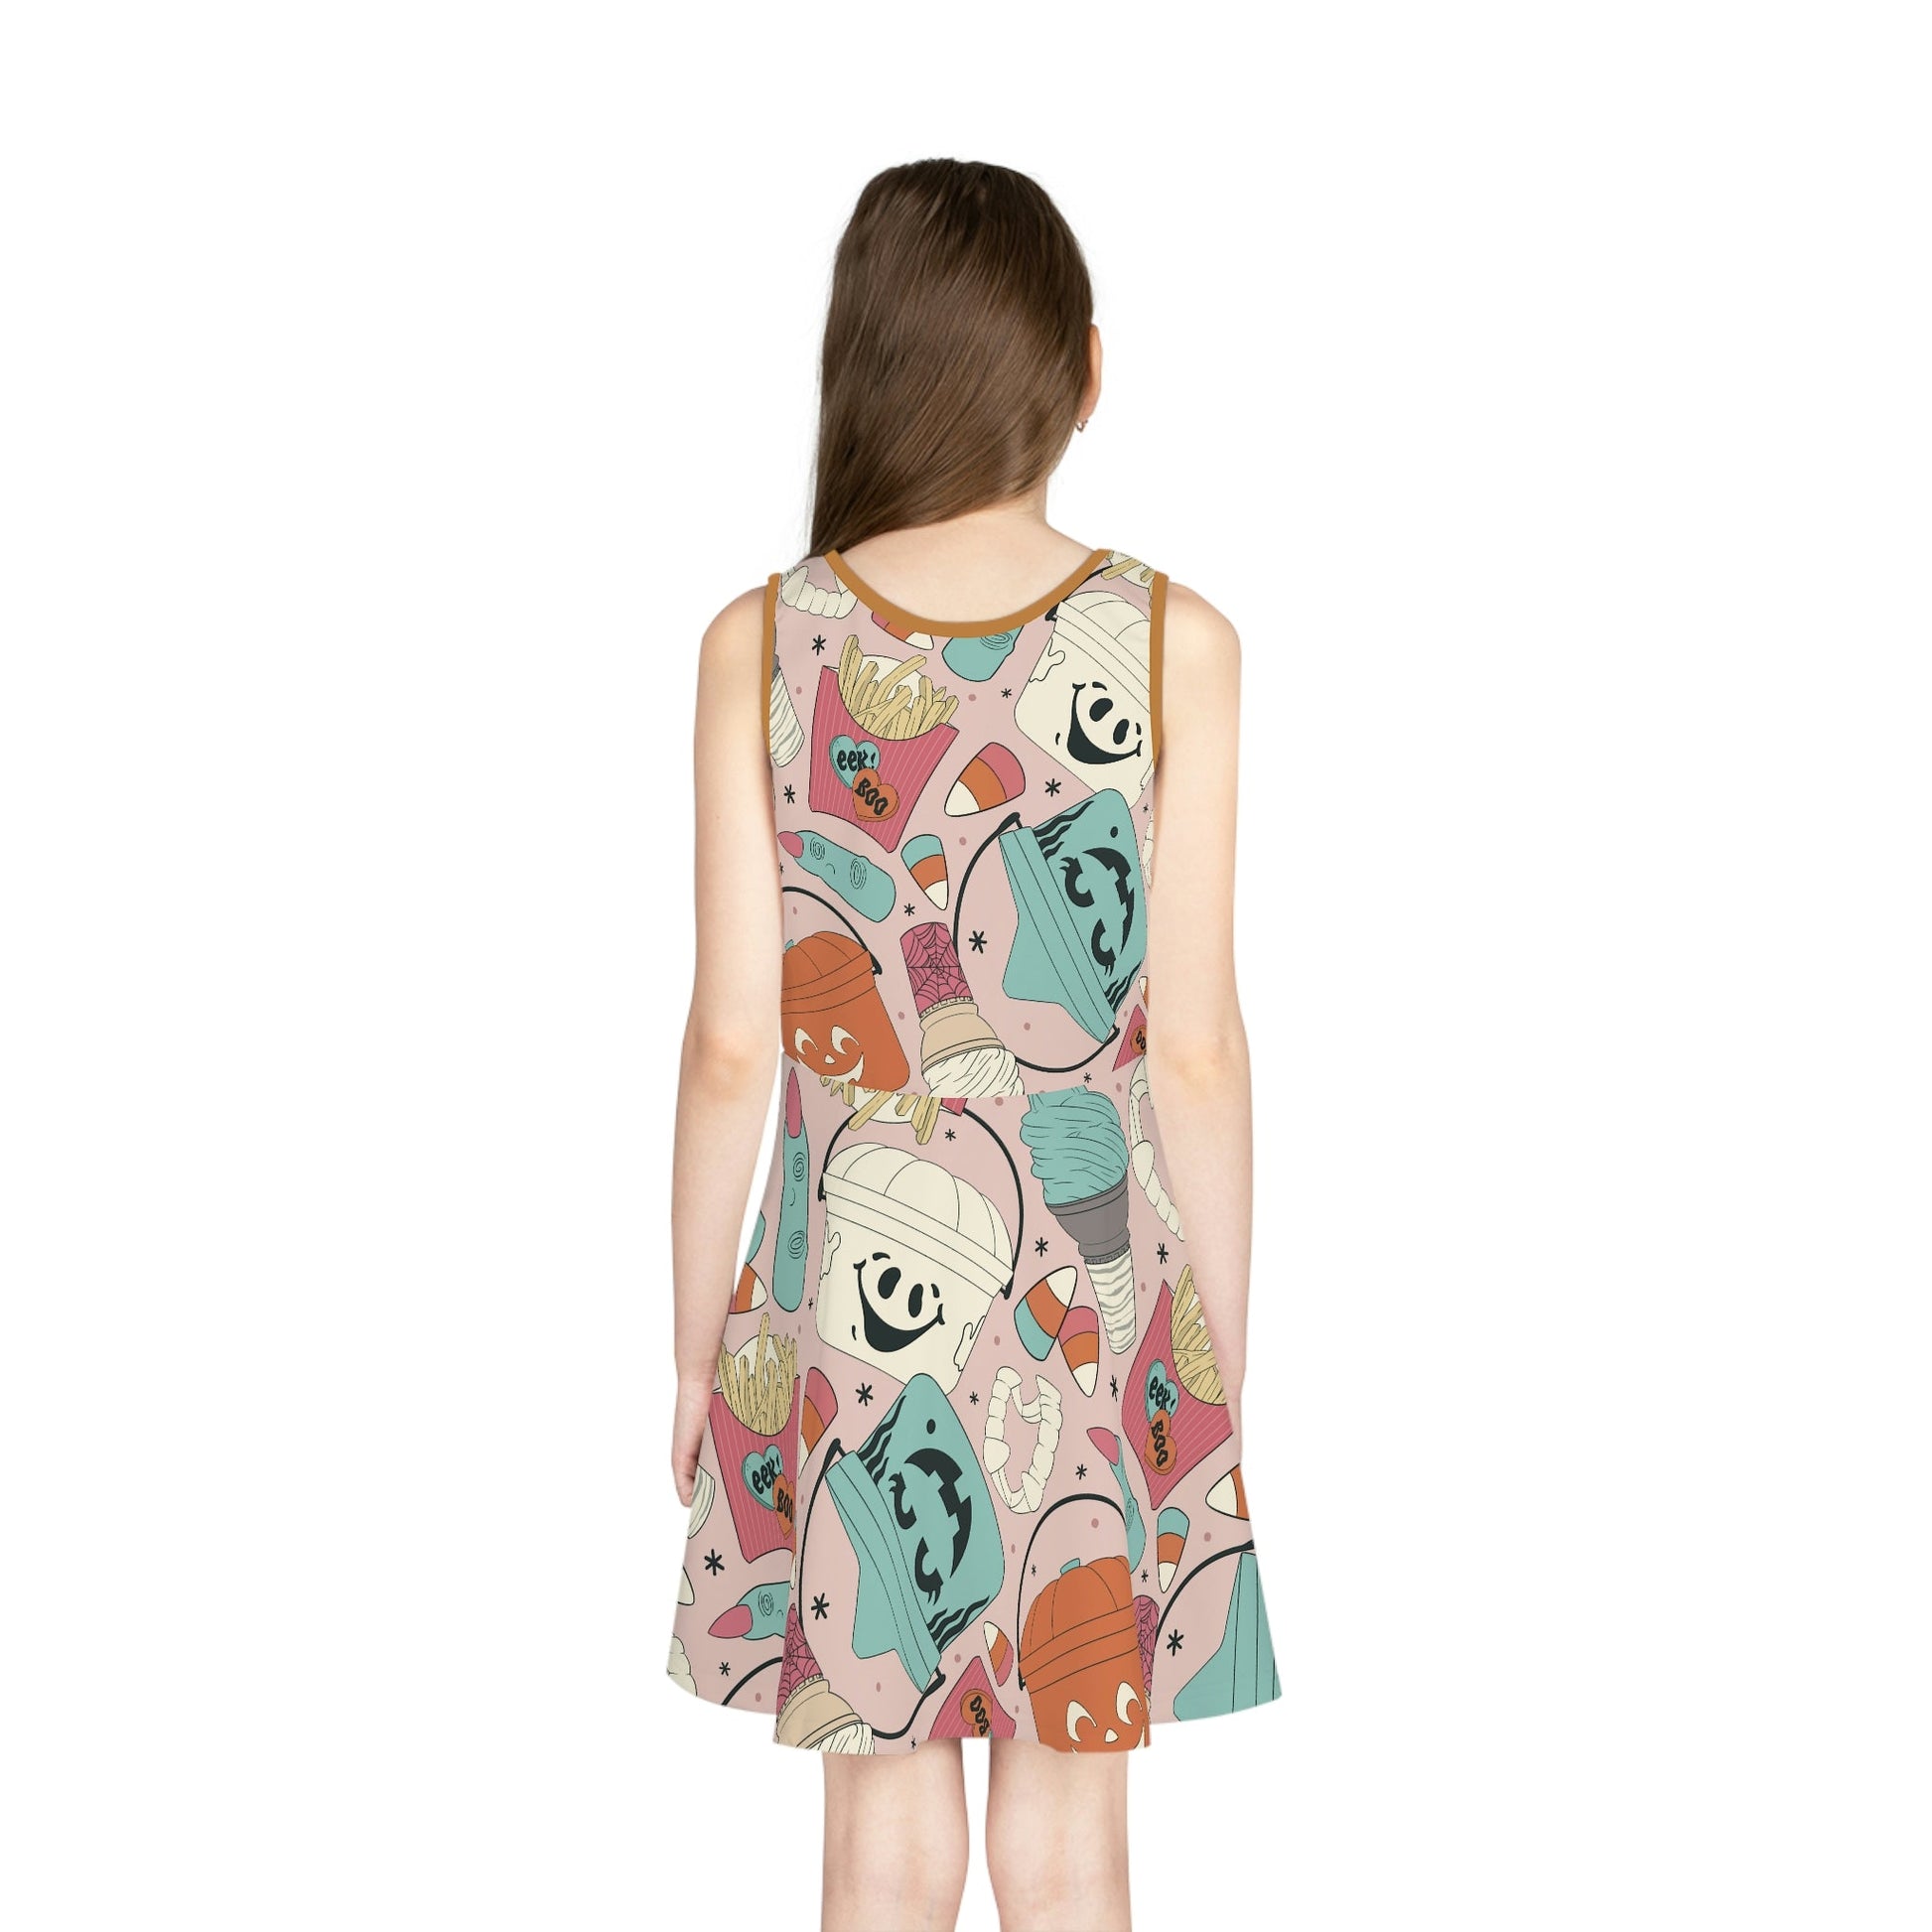 Boho Halloween Container Girls' Sleeveless Sundress (AOP) All Over PrintAOPAOP Clothing#tag4##tag5##tag6#